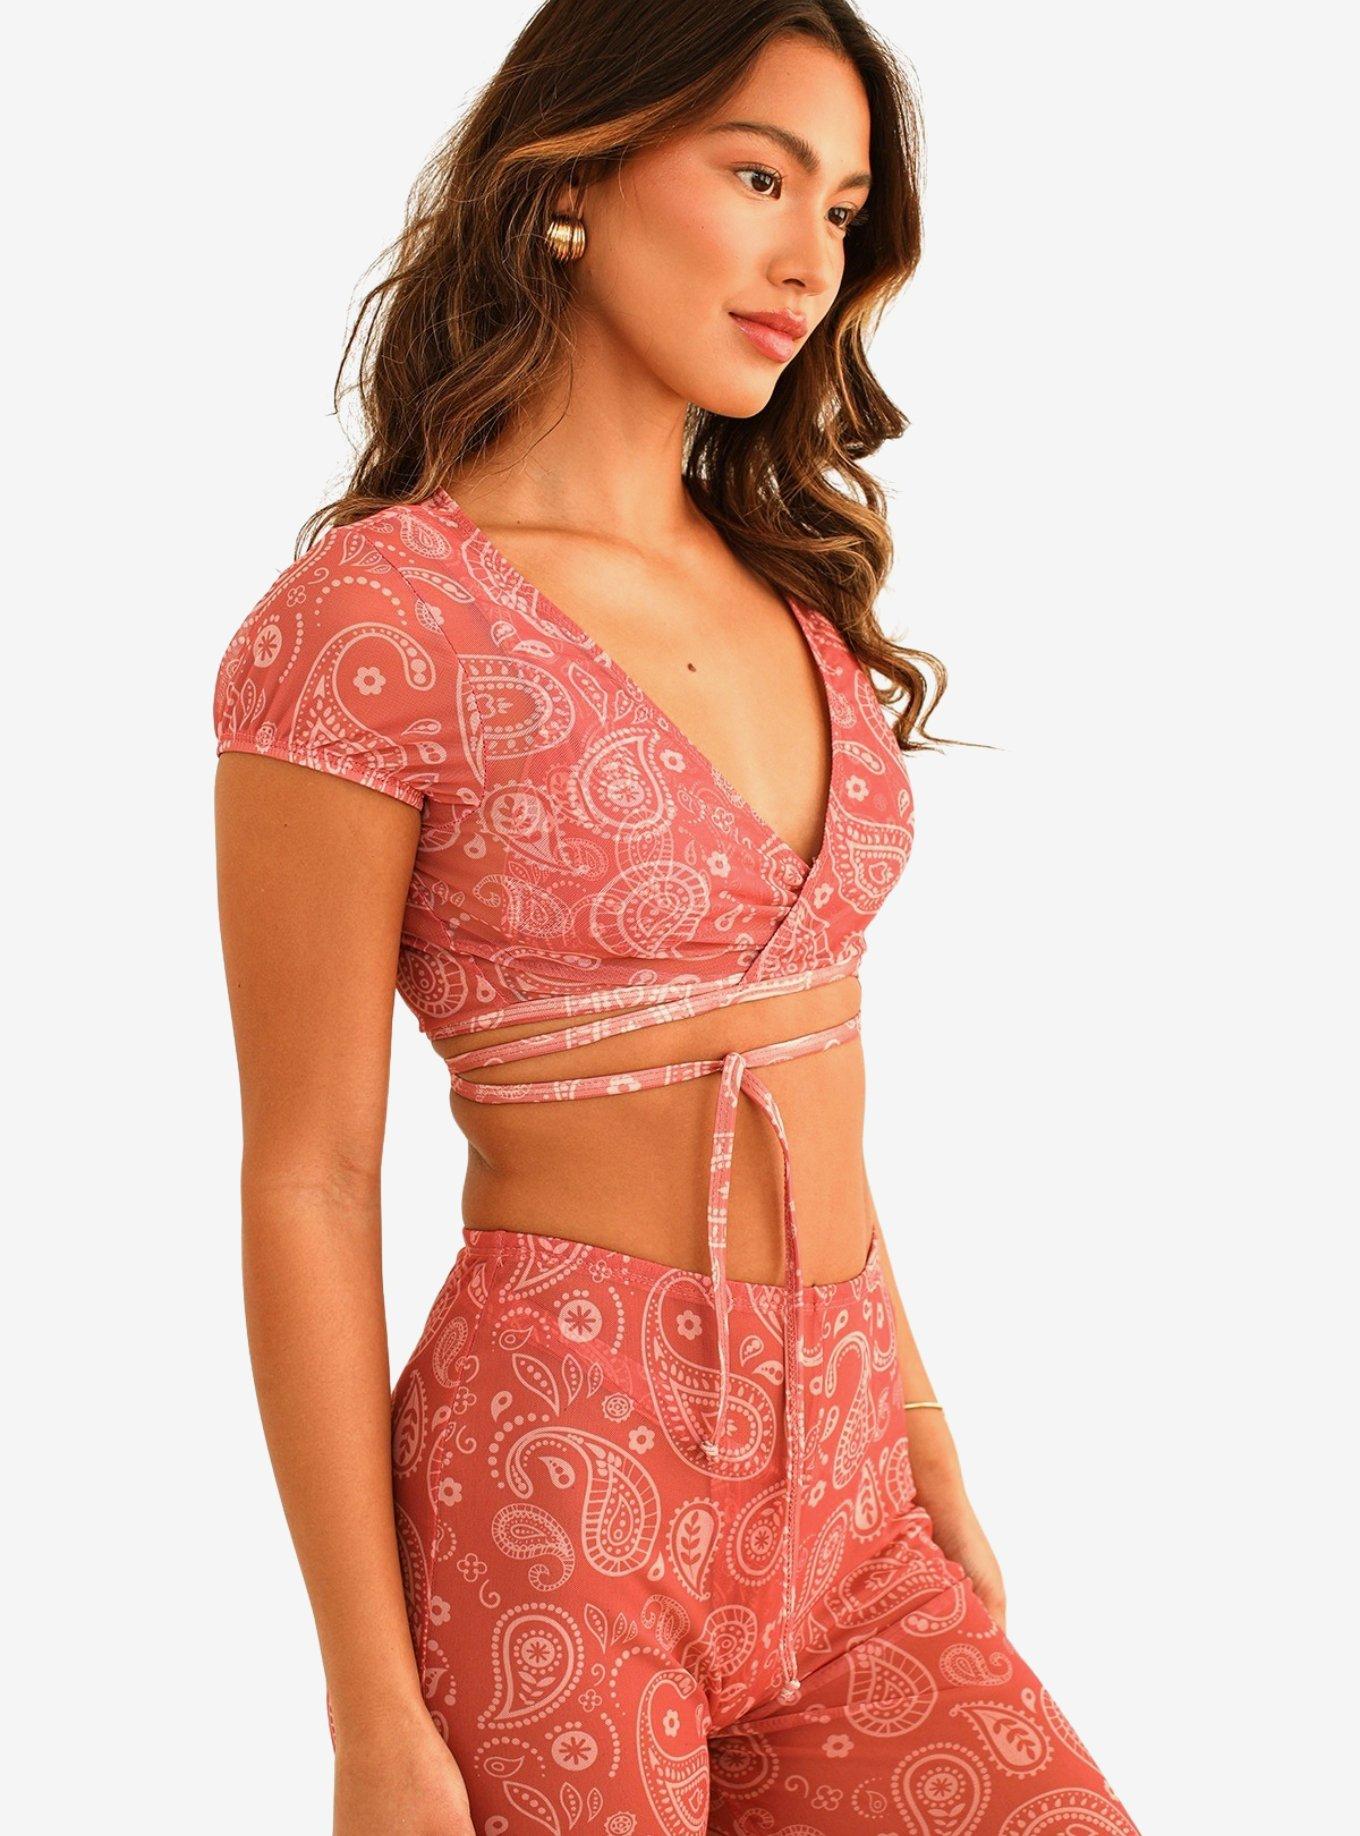 Dippin' Daisy's Cher Swim Cover-Up Top Pink Paisley, PAISLEY, alternate